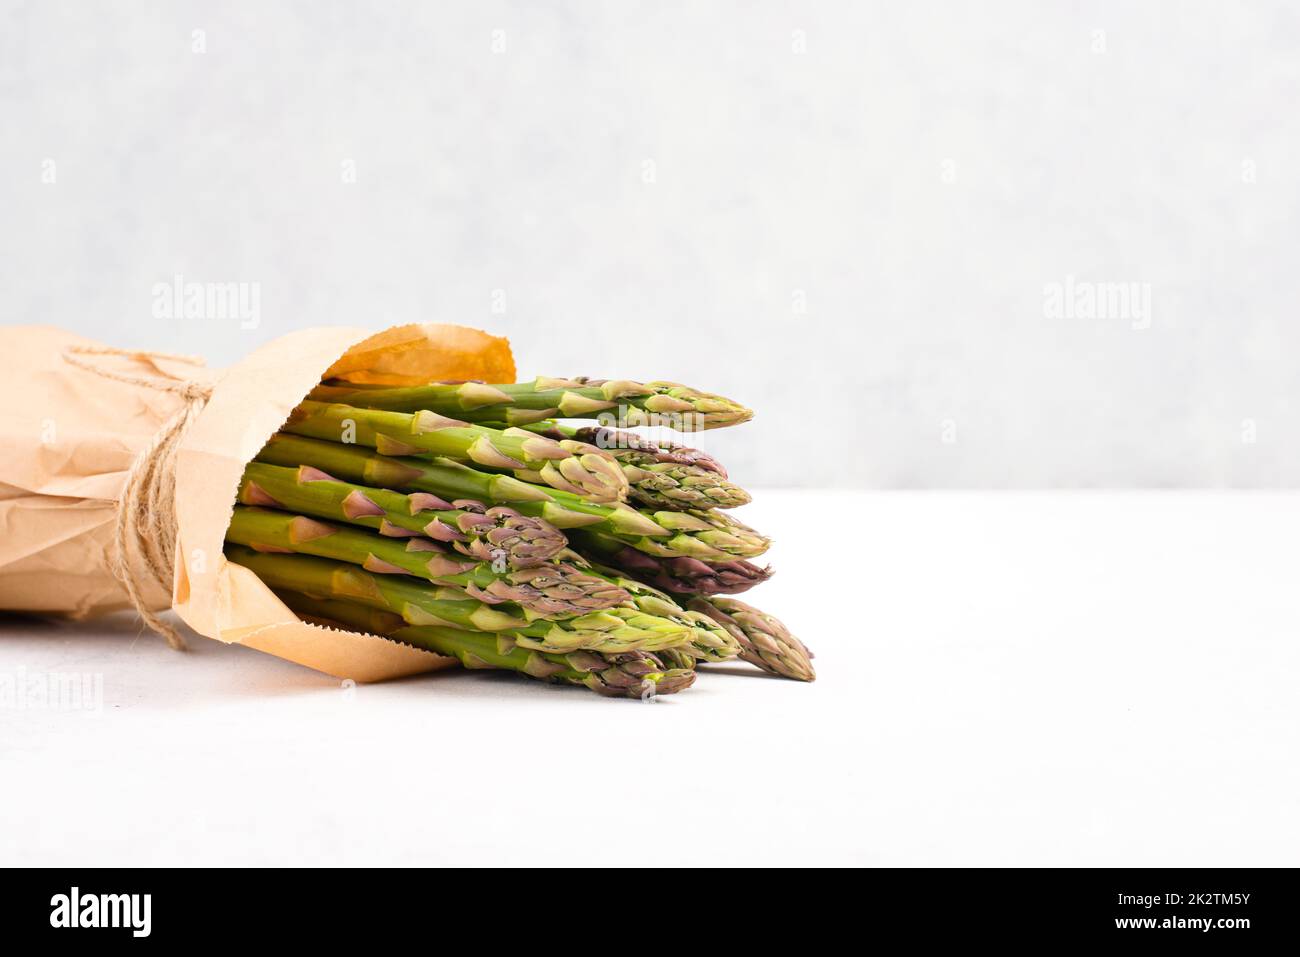 Fresh green bundle of asparagus on a white textured table, vegetables in spring, gourmet cuisine food, cooking a vegan meal Stock Photo